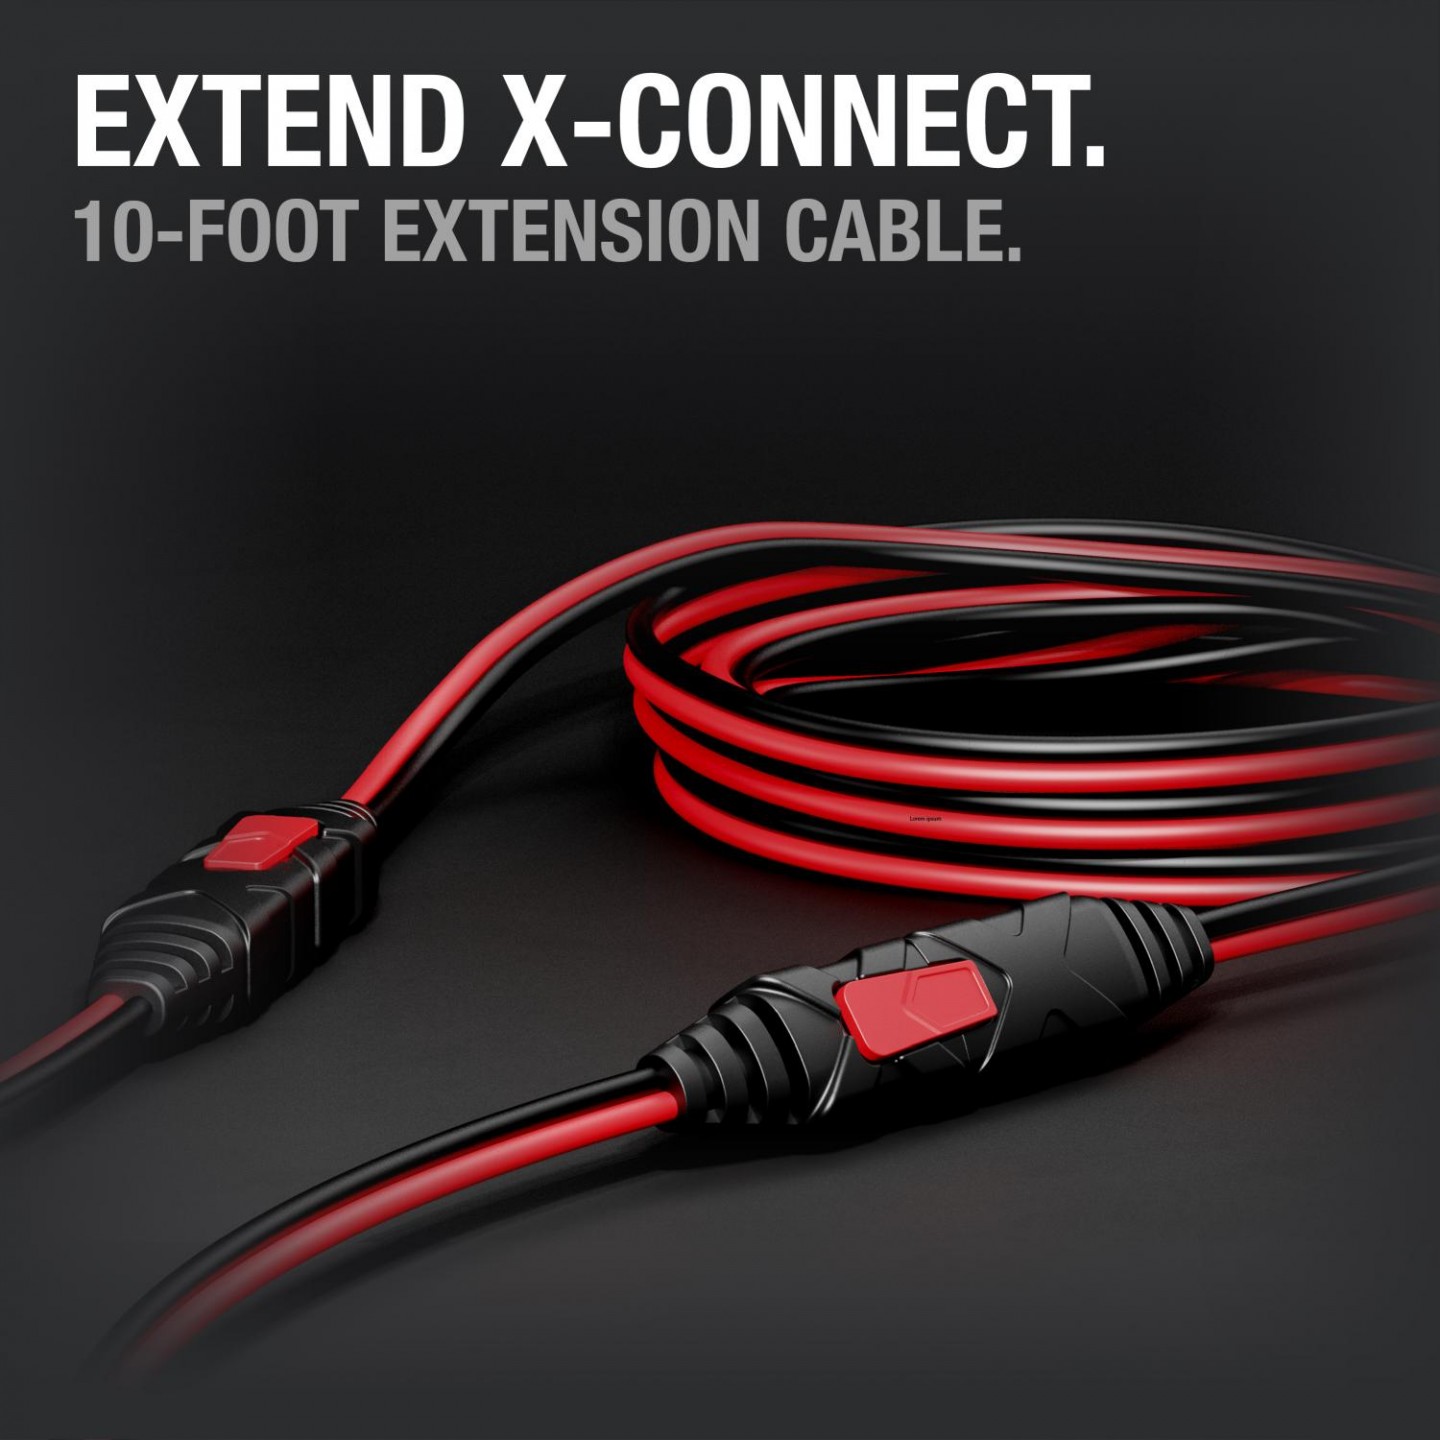 NOCO - X-Connect 10' Extension Cable - GC004